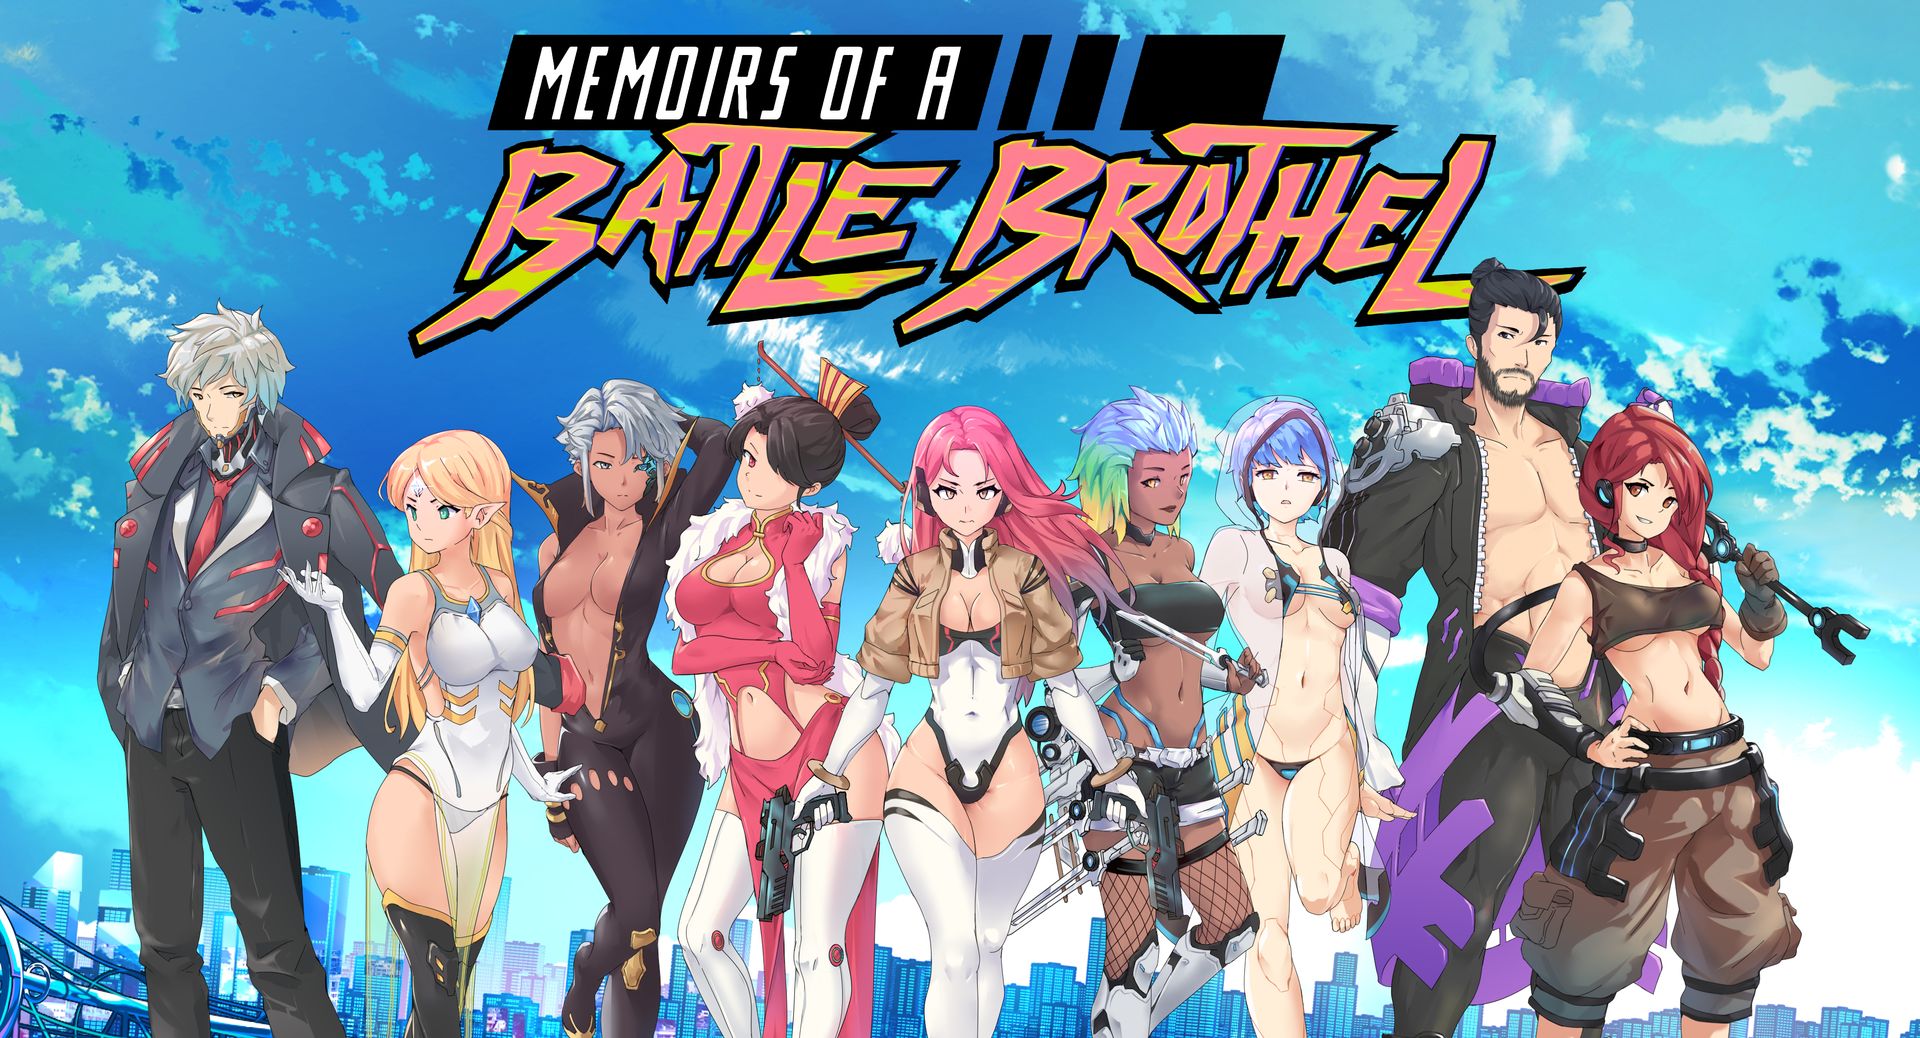 Download - Memoirs of a Battle Brothel [v1.06 Final] by A Memory of Eternity.